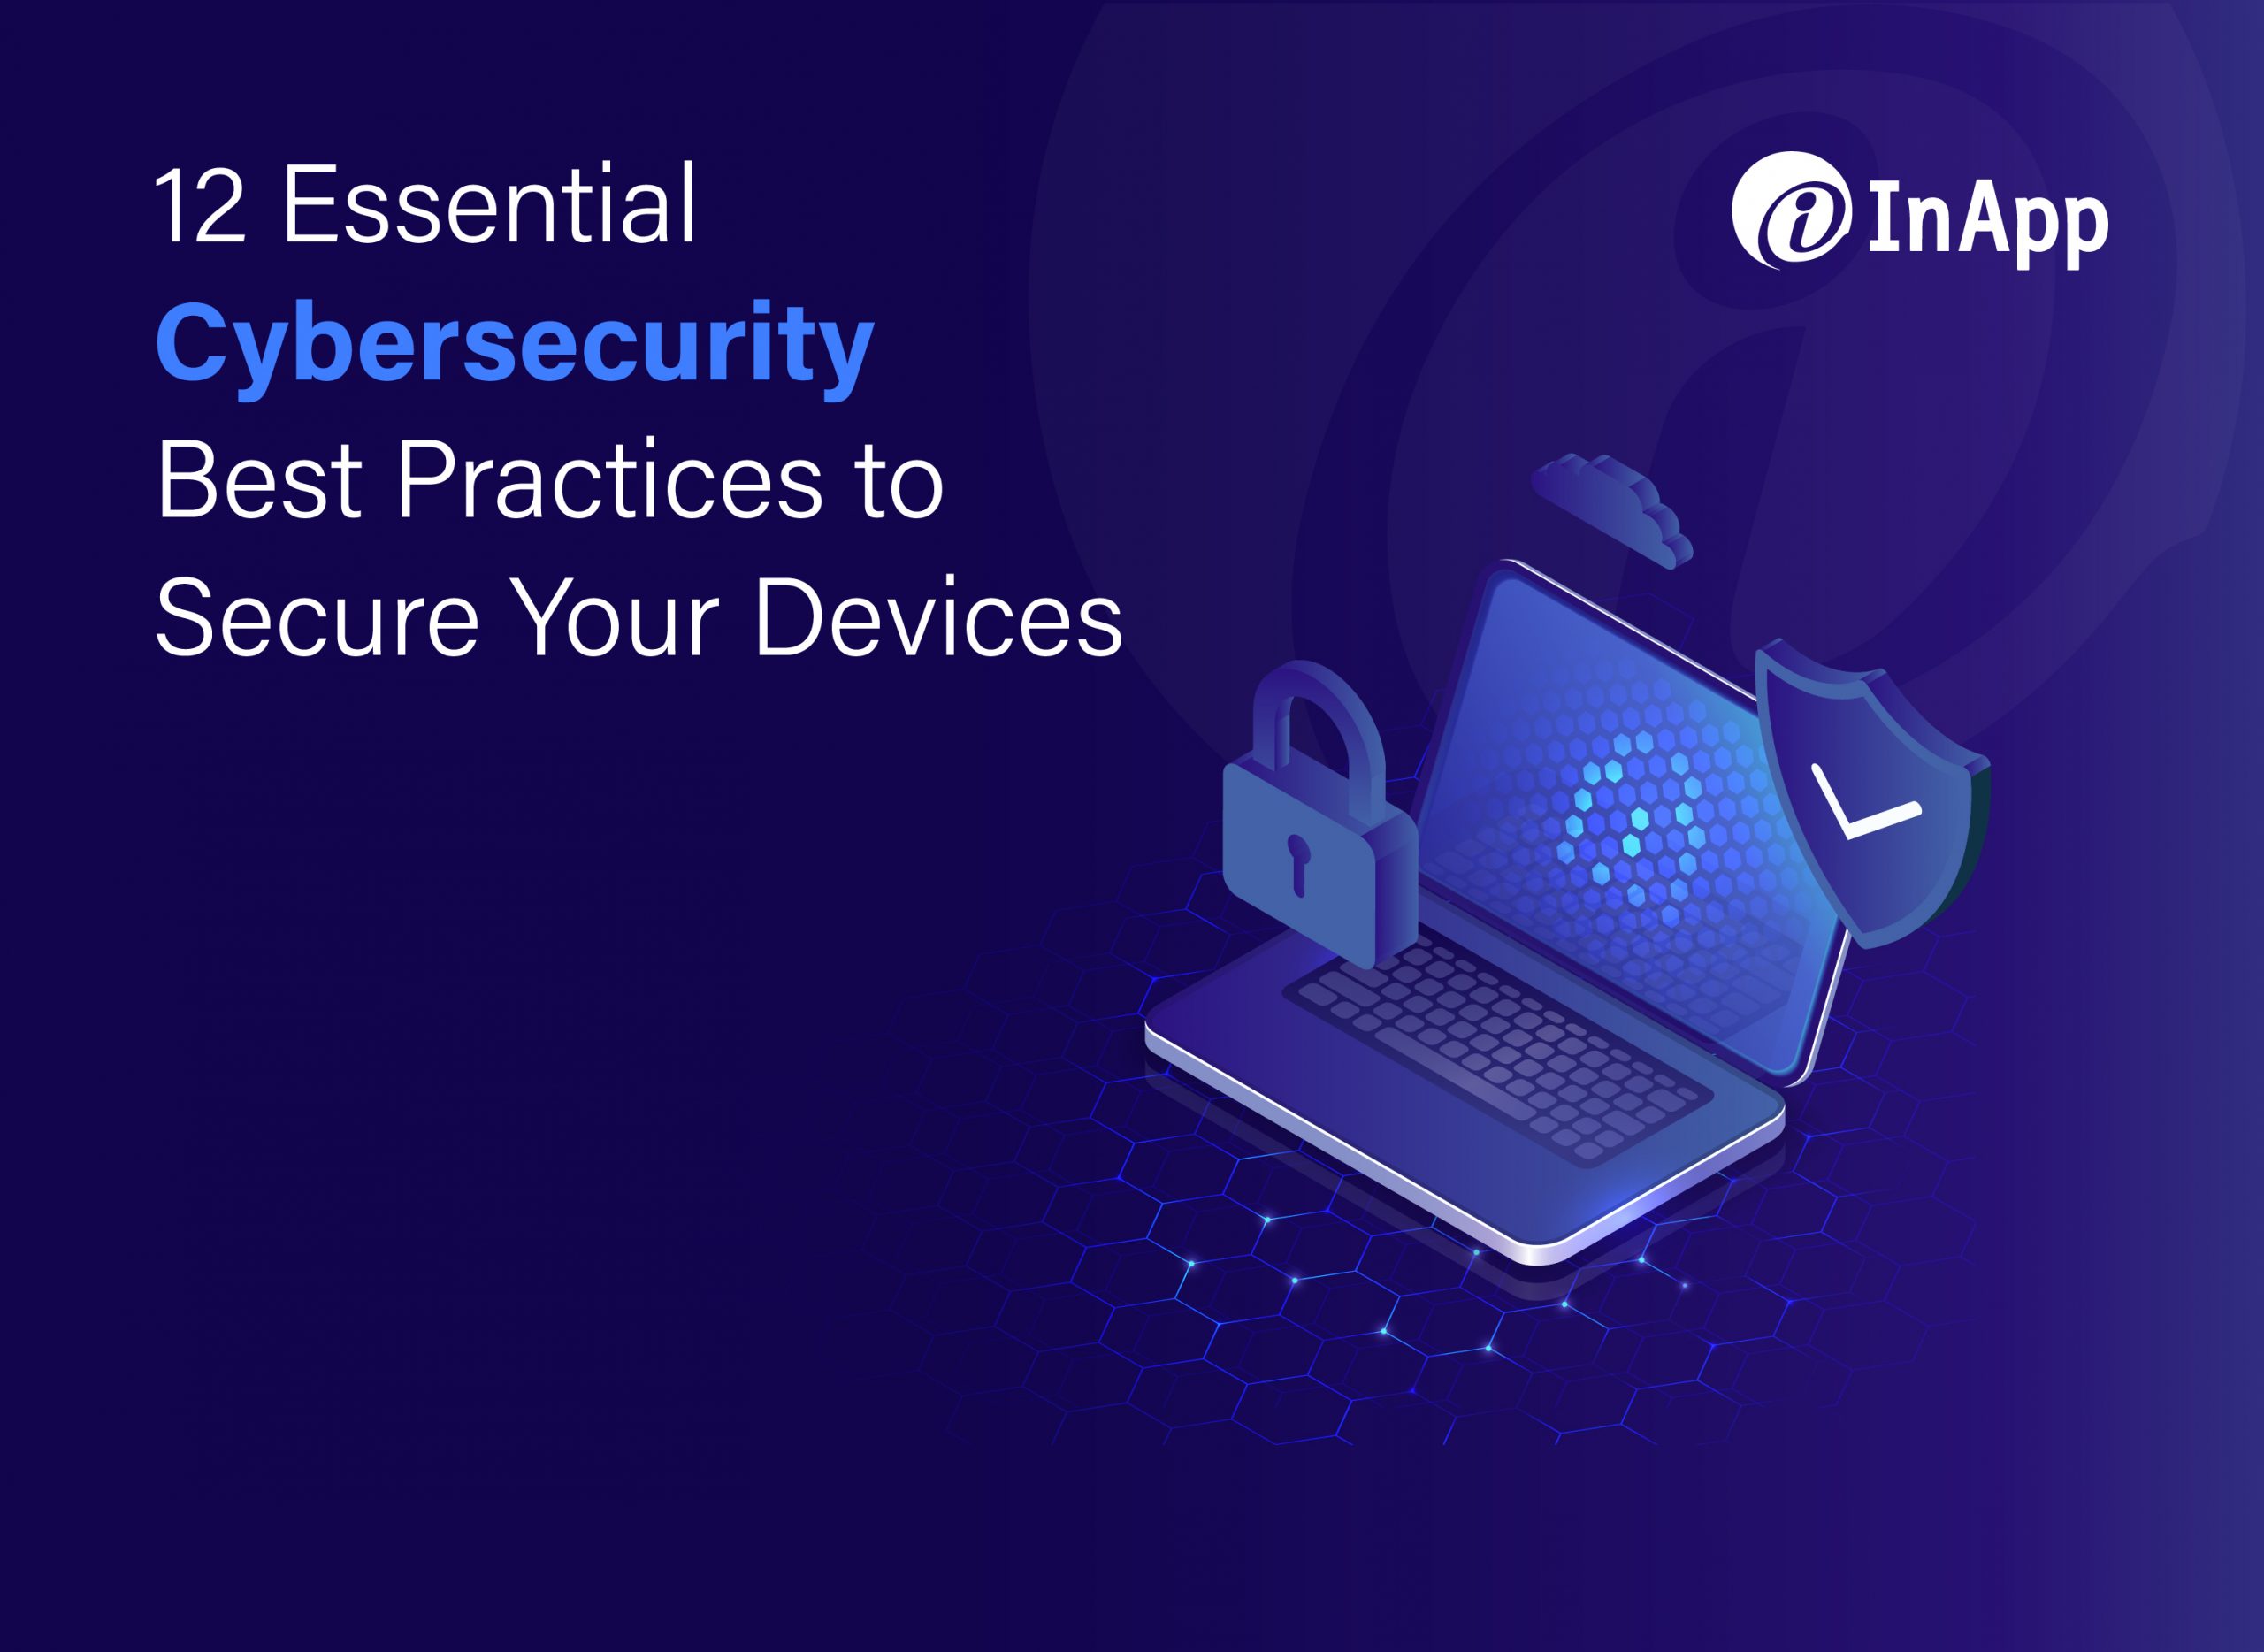 12 Essential Cybersecurity Best Practices to Secure Your Devices